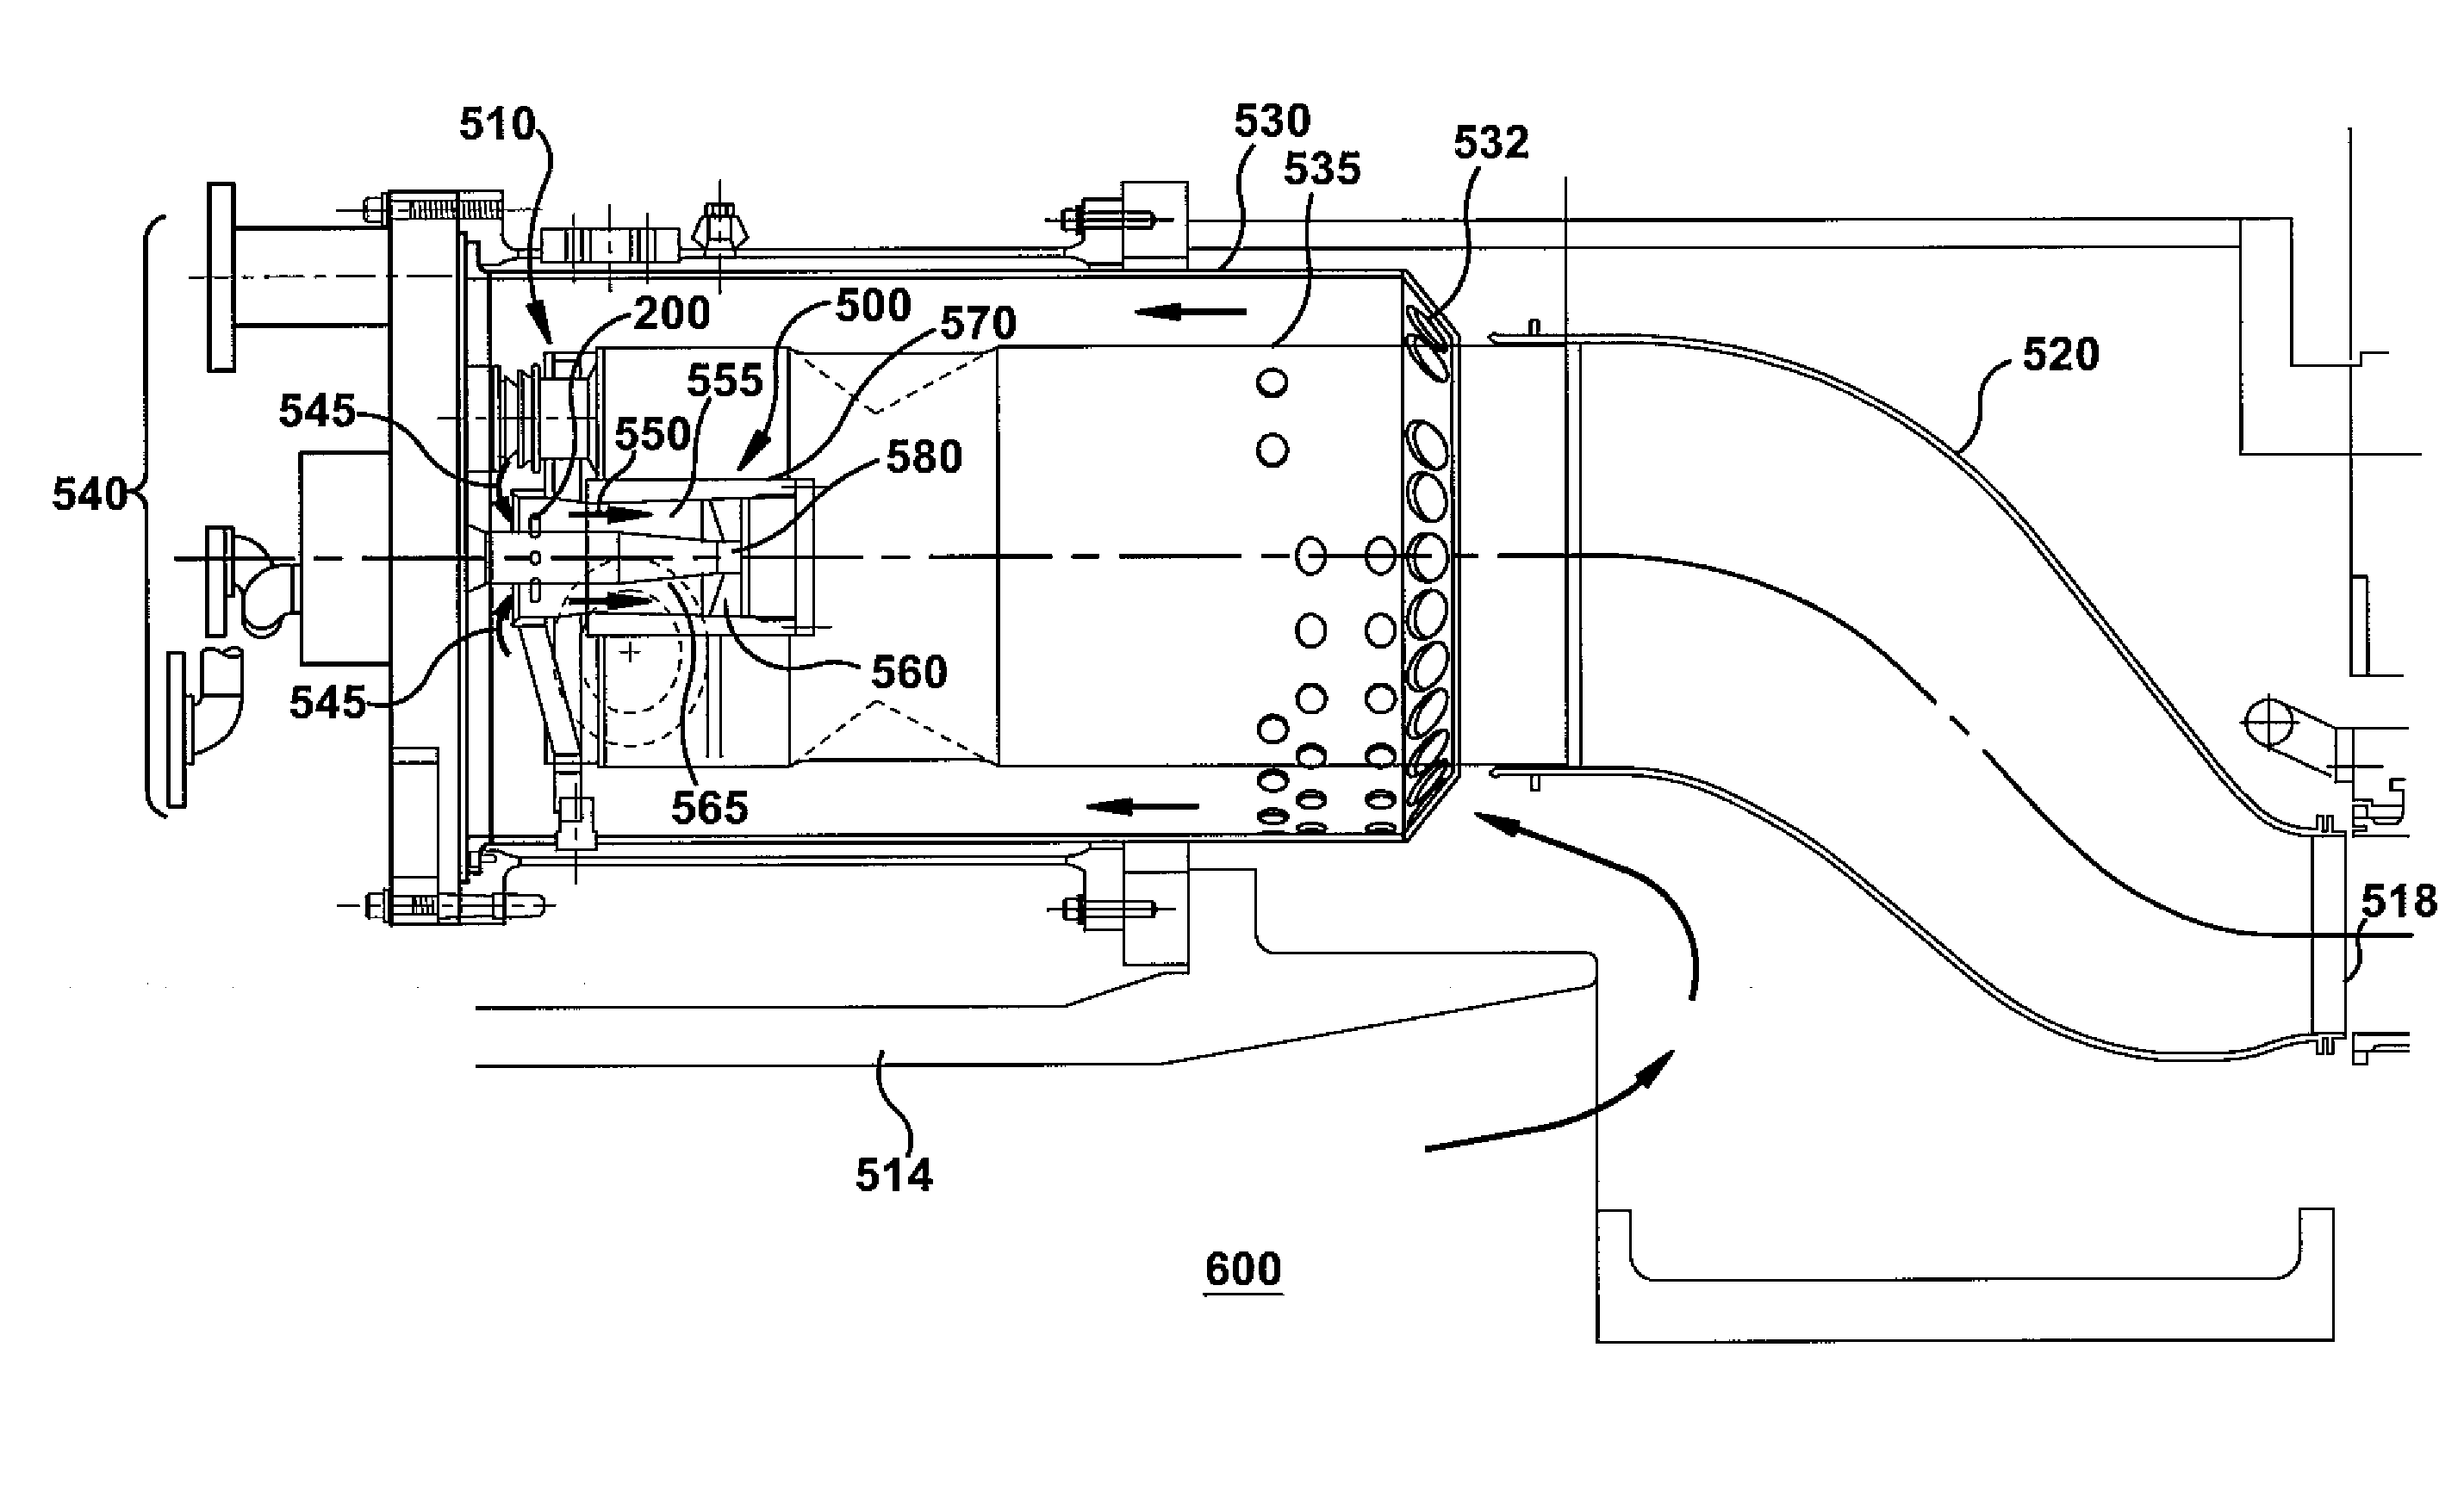 Toroidal ring manifold for secondary fuel nozzle of a dln gas turbine